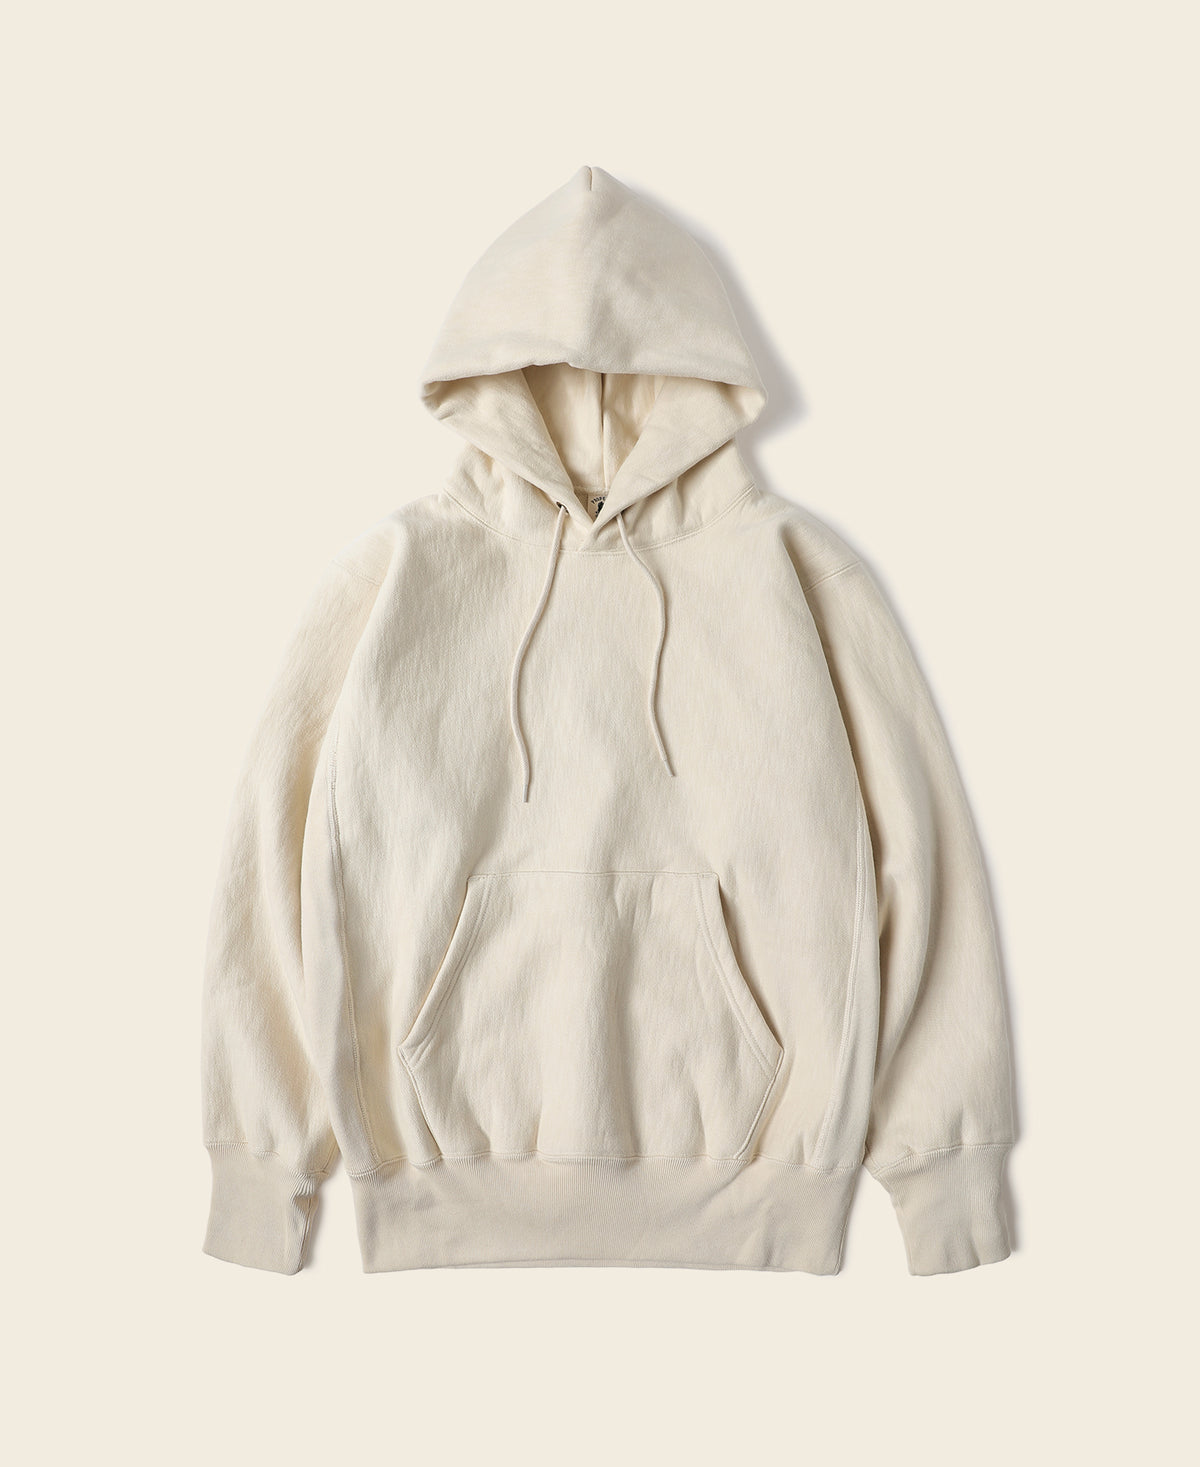 21 oz Military Academy Reverse Weave Hoodie - Apricot